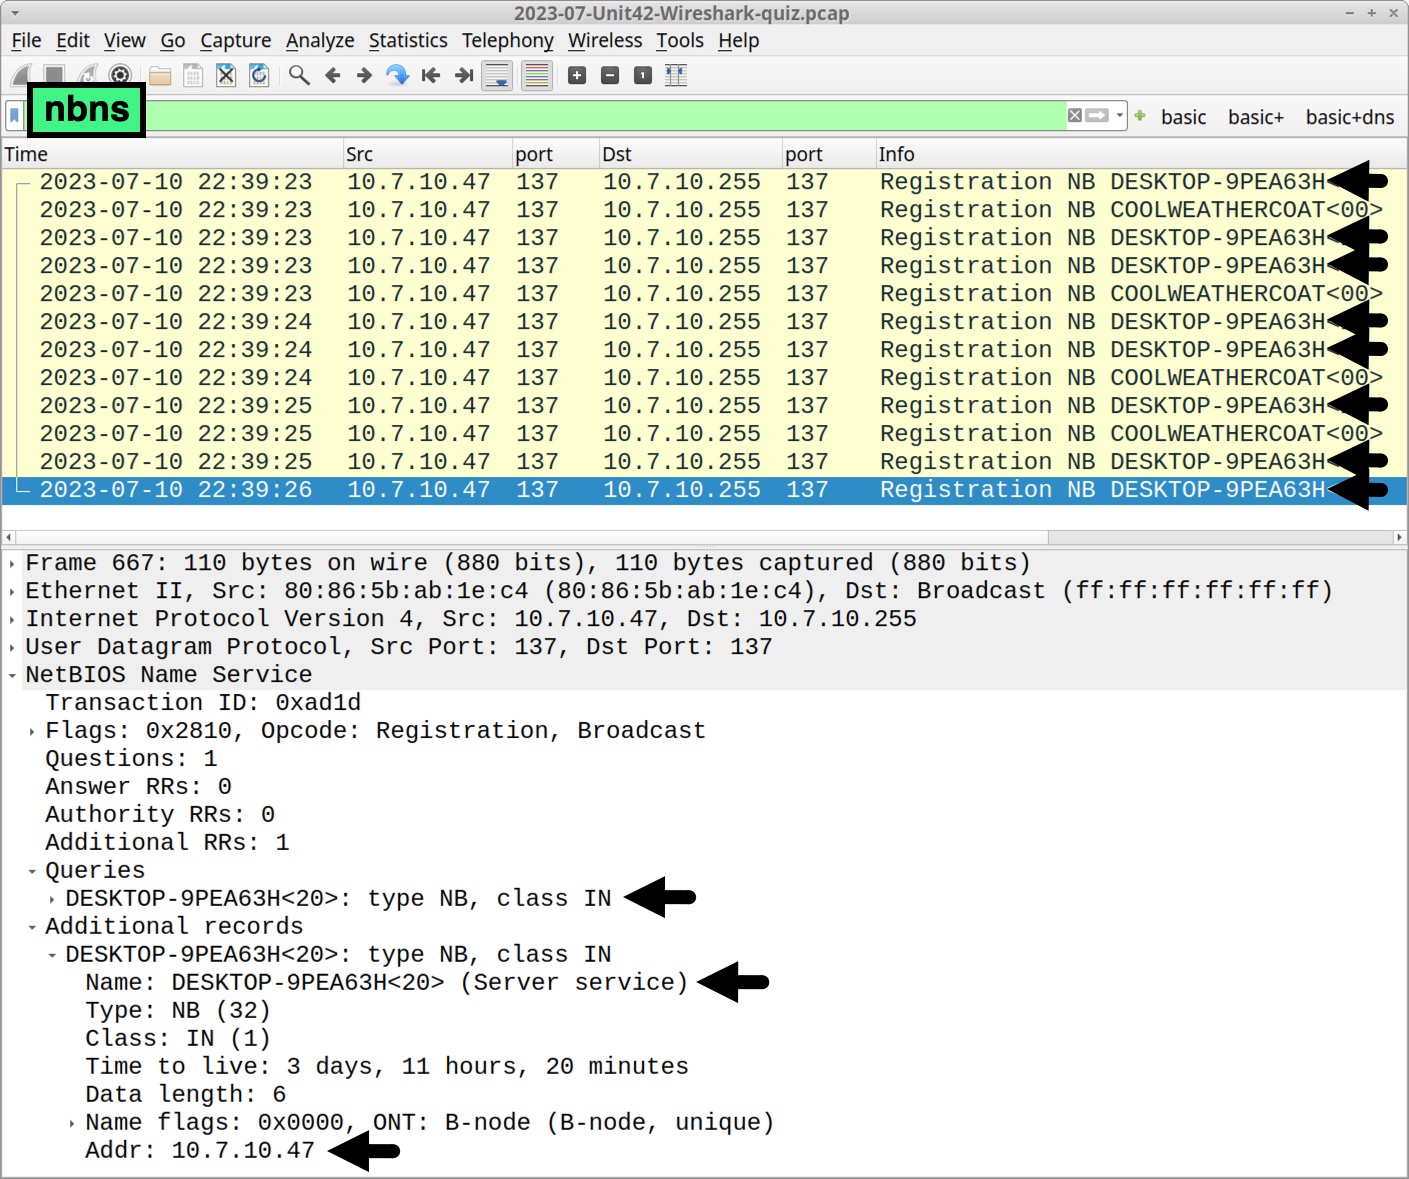 Image 2 is a screenshot of Wireshark. A green box indicates that the traffic filter is NBNS. Black arrows in the traffic window indicate DESKTOP-9PEA63H in the info column. Black arrows in the bottom window indicate the queries, name and address.